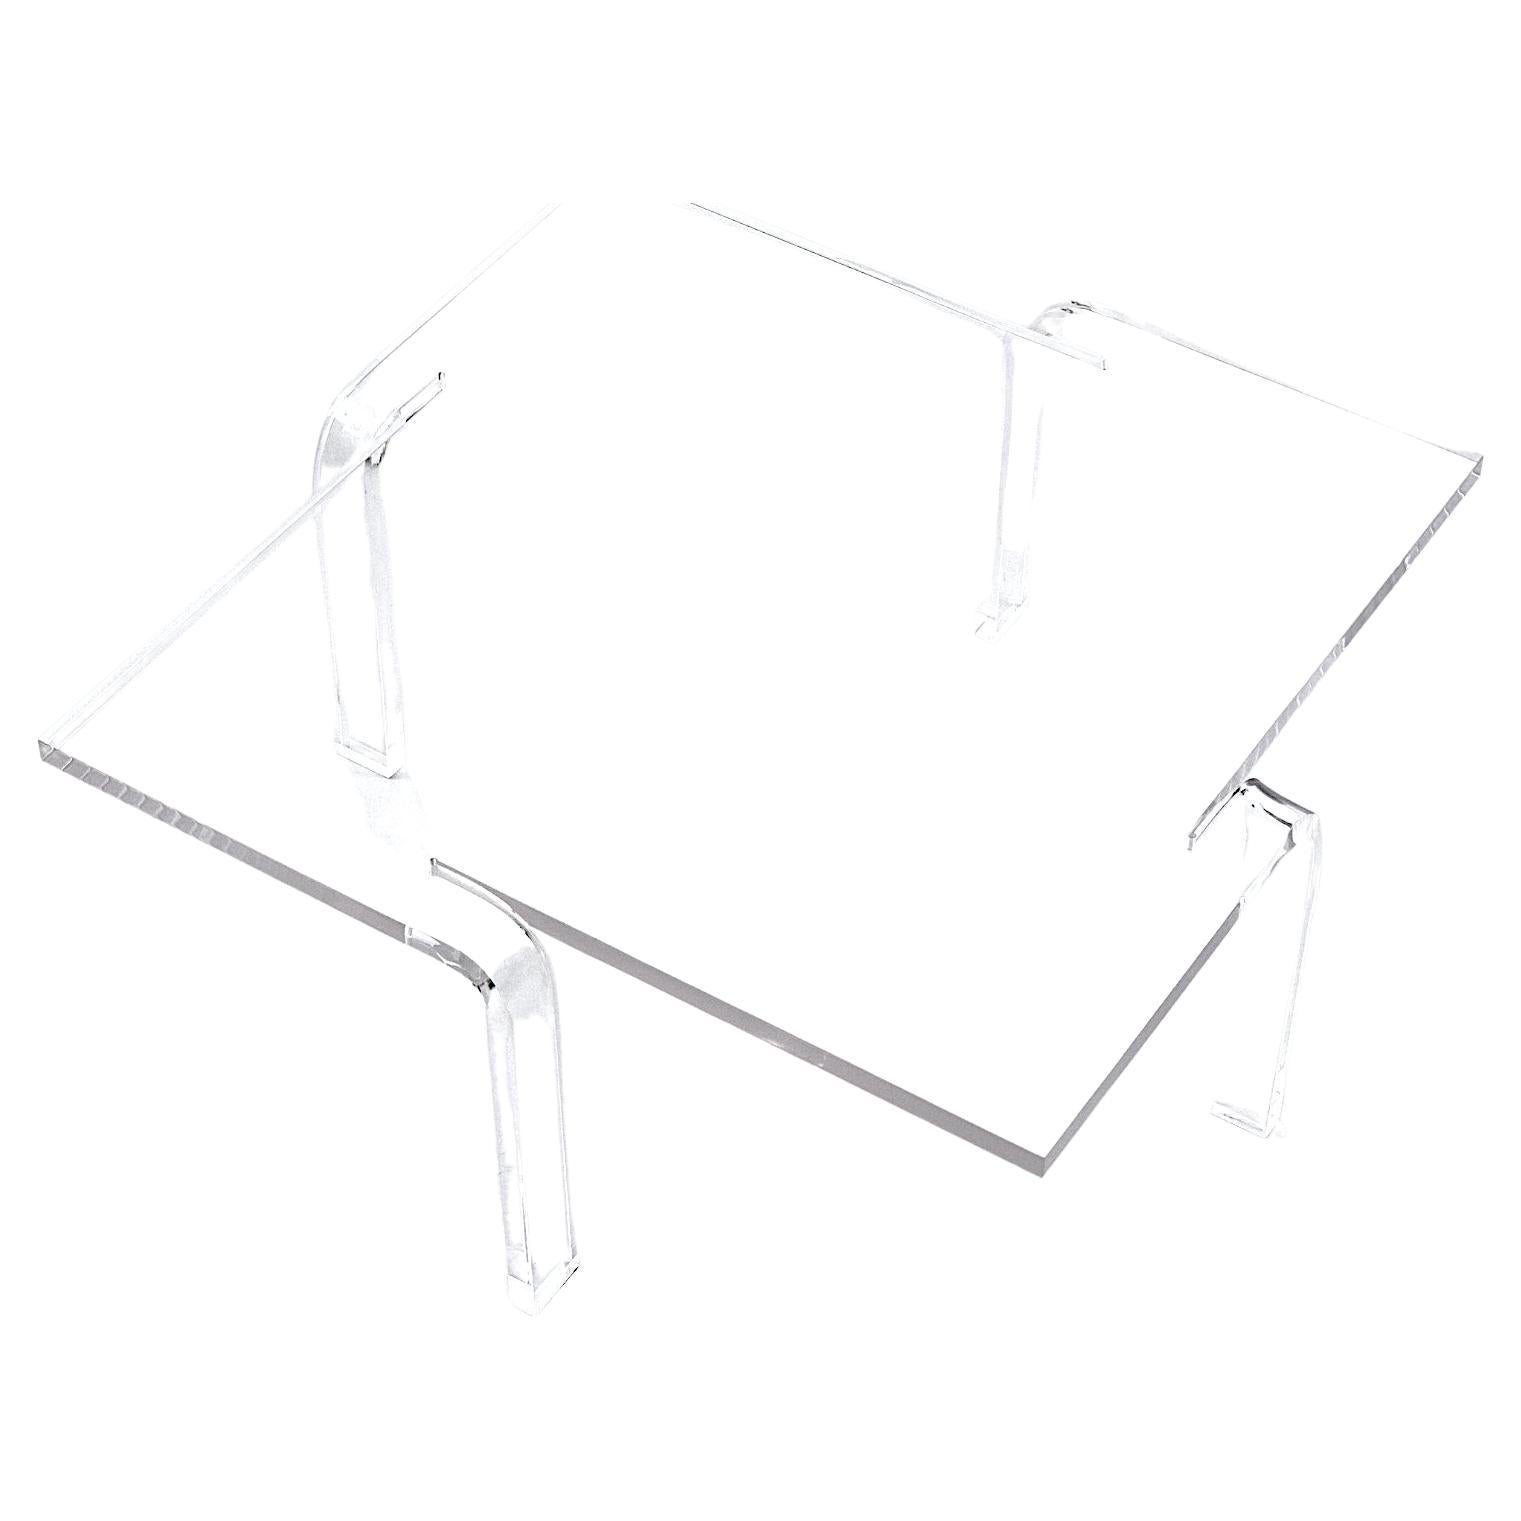 Mid-Century Modern Neal Small Model 5031 Coffee Cocktail Table, Lucite, 1966, New York